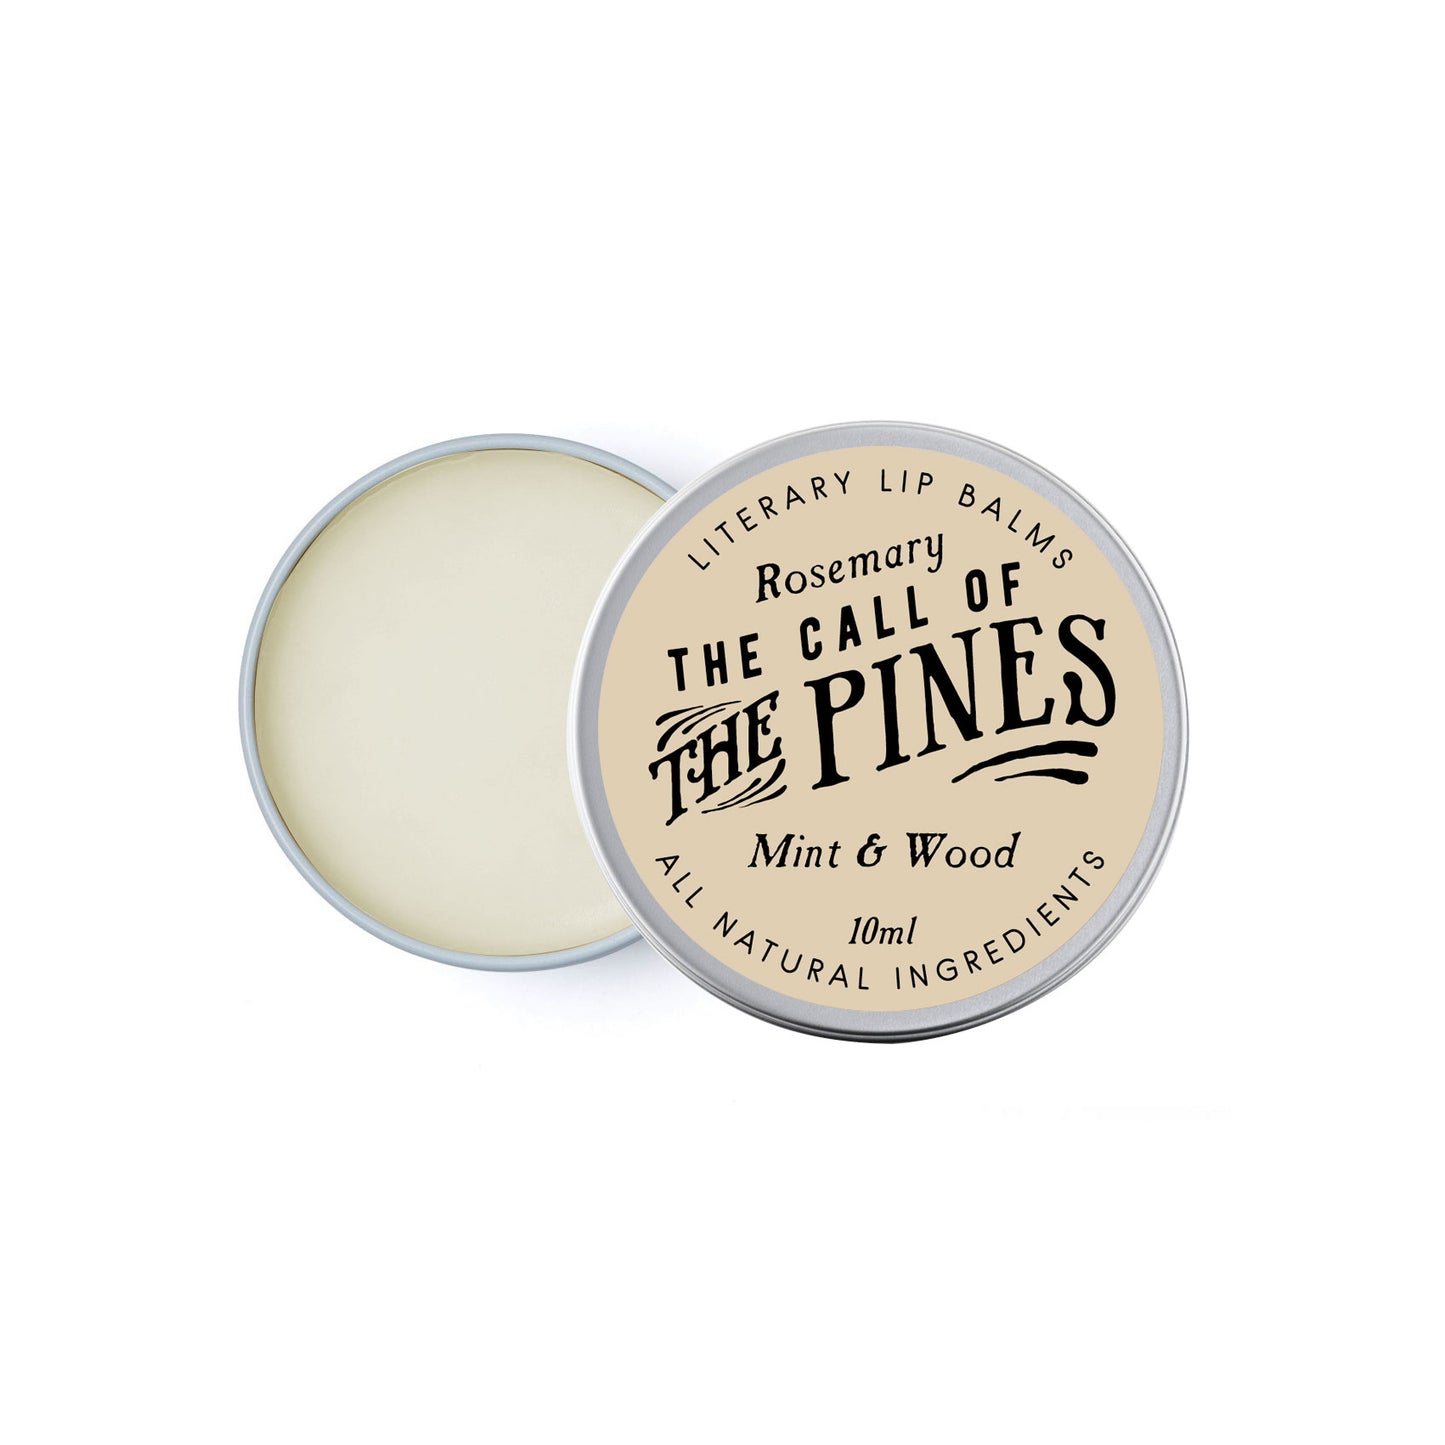 Literary Lip Balms: The Call of the Pines